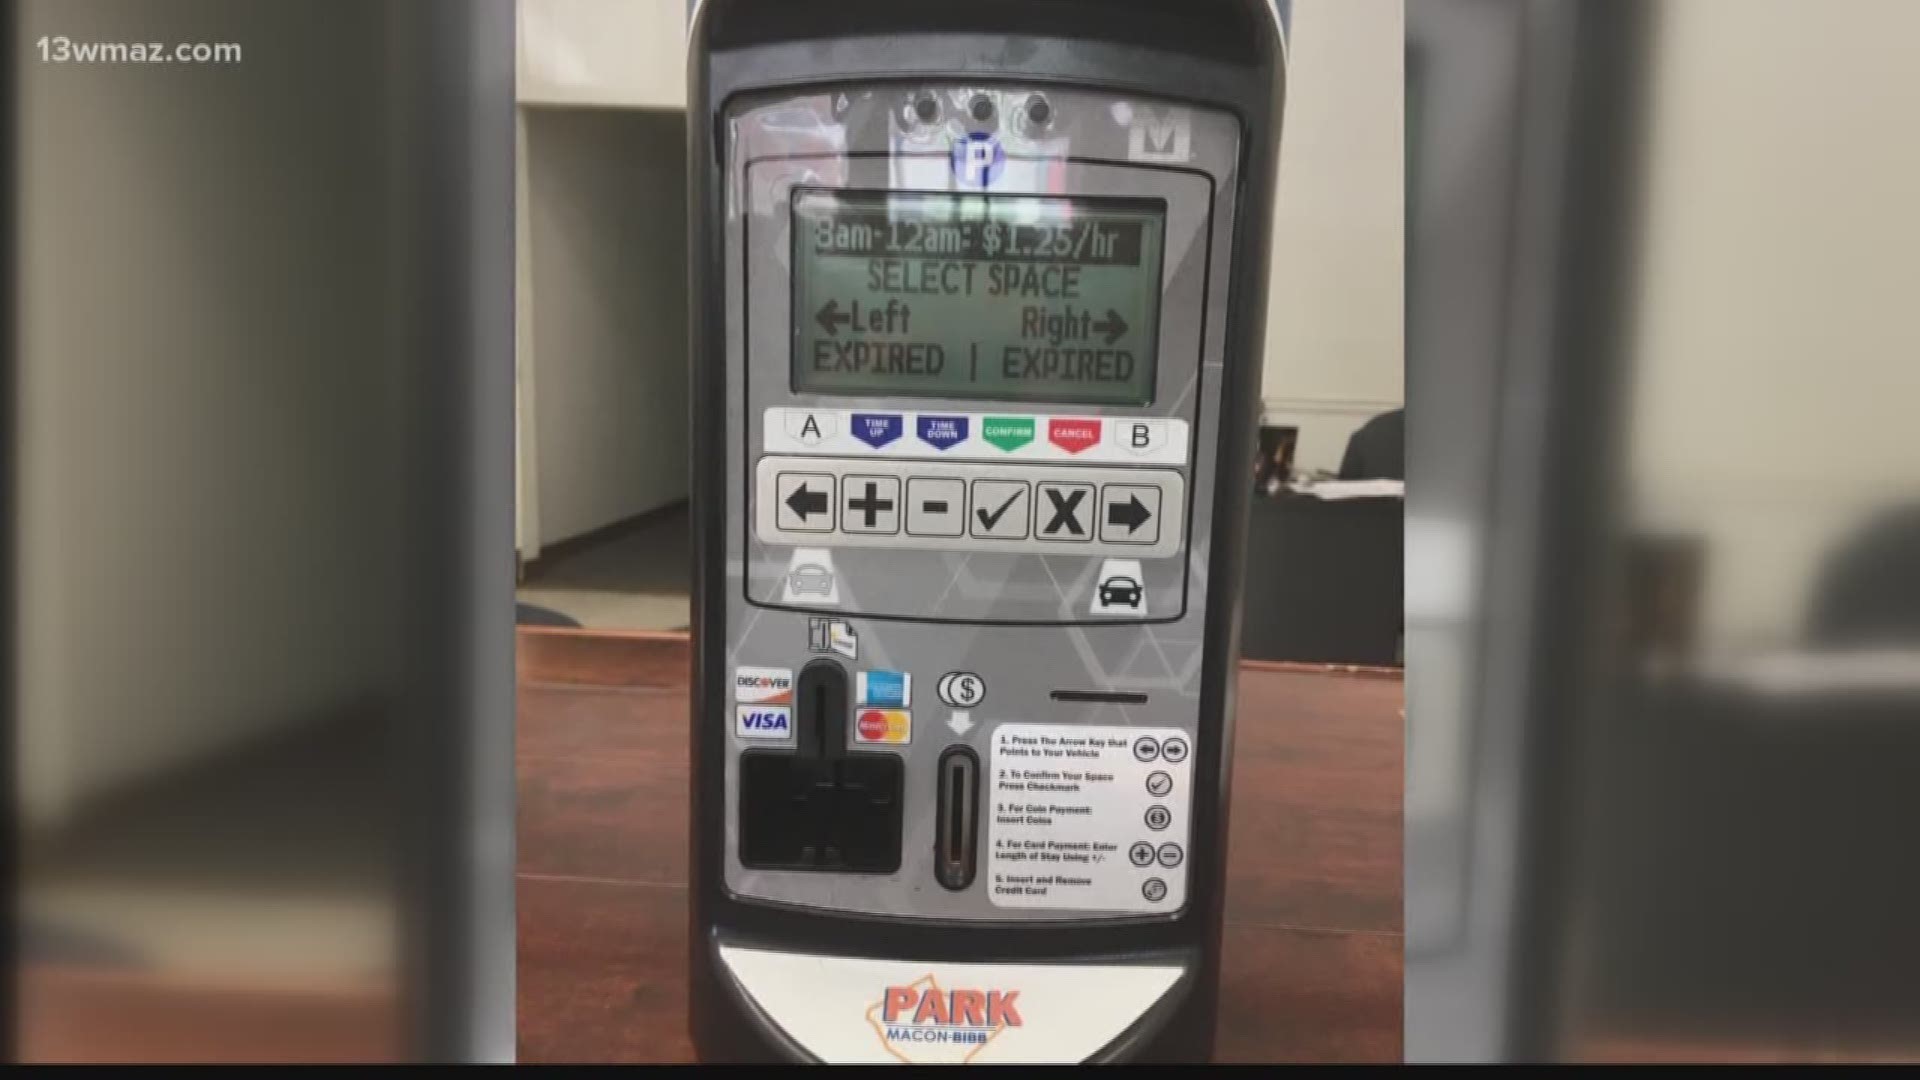 Parking meters coming to Macon by July